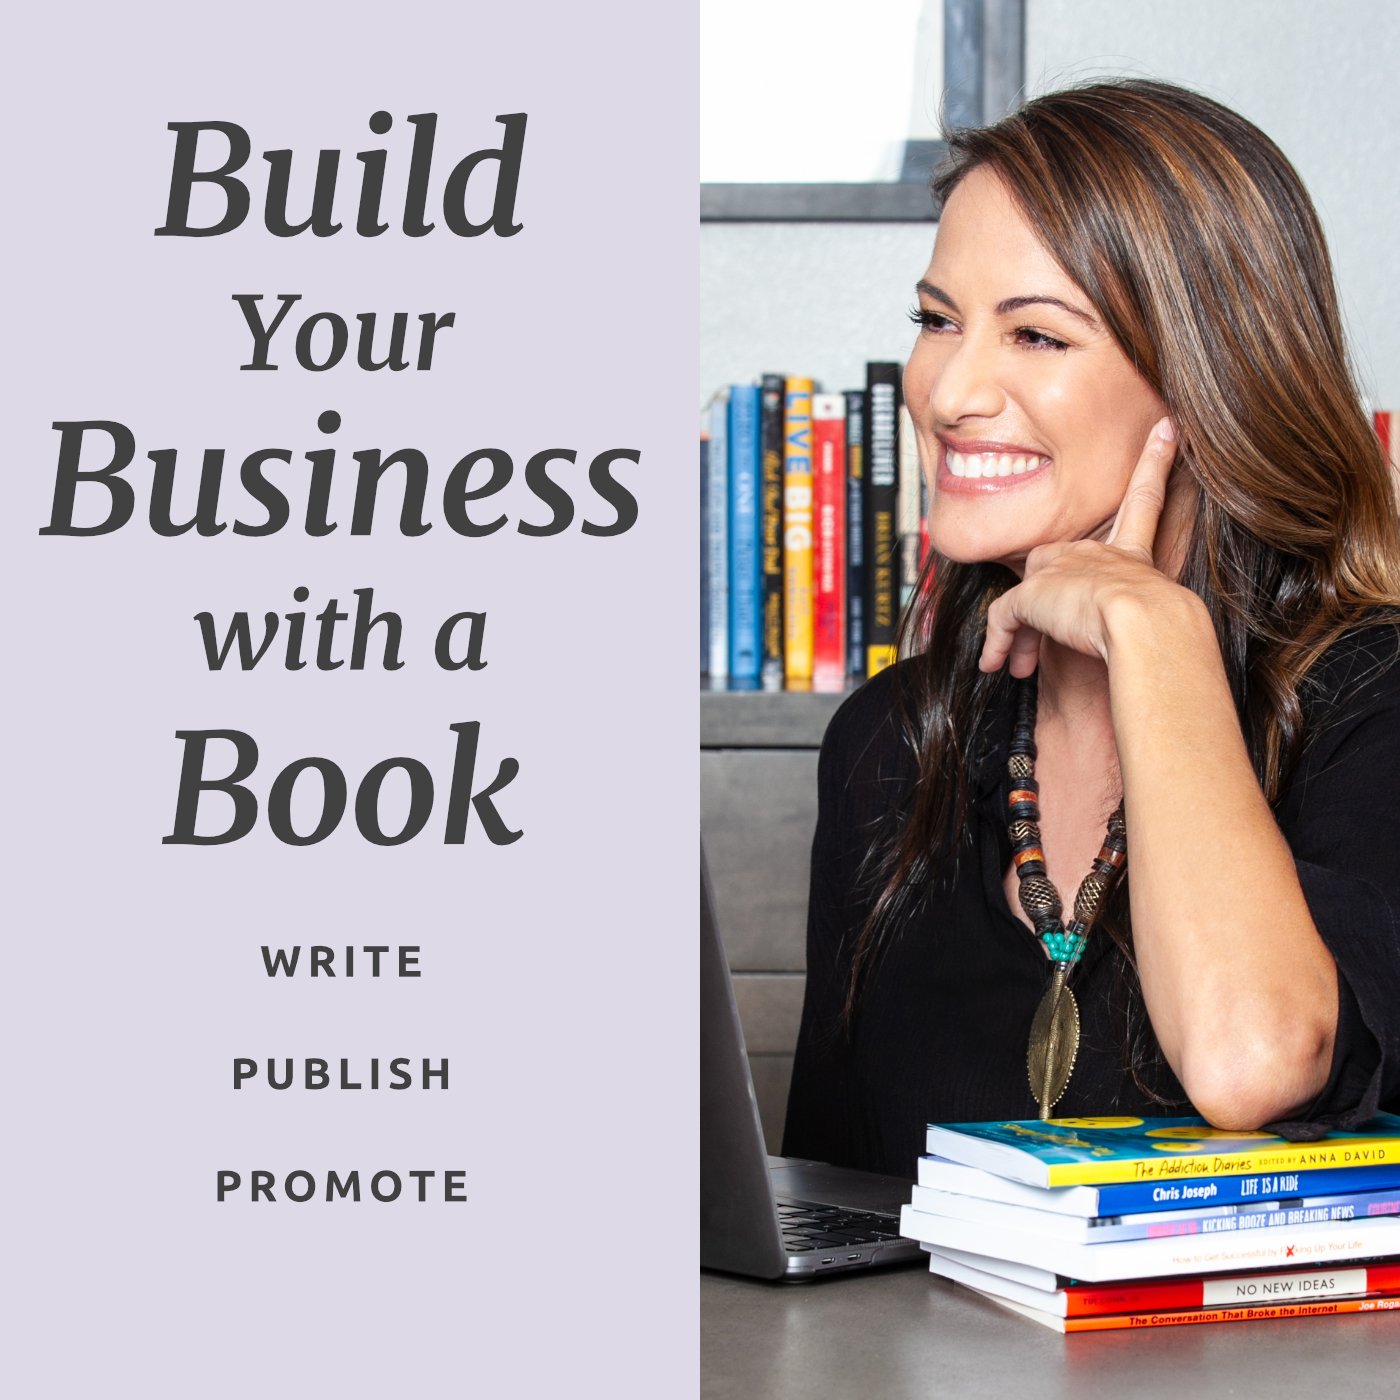 Build Your Business with a Book